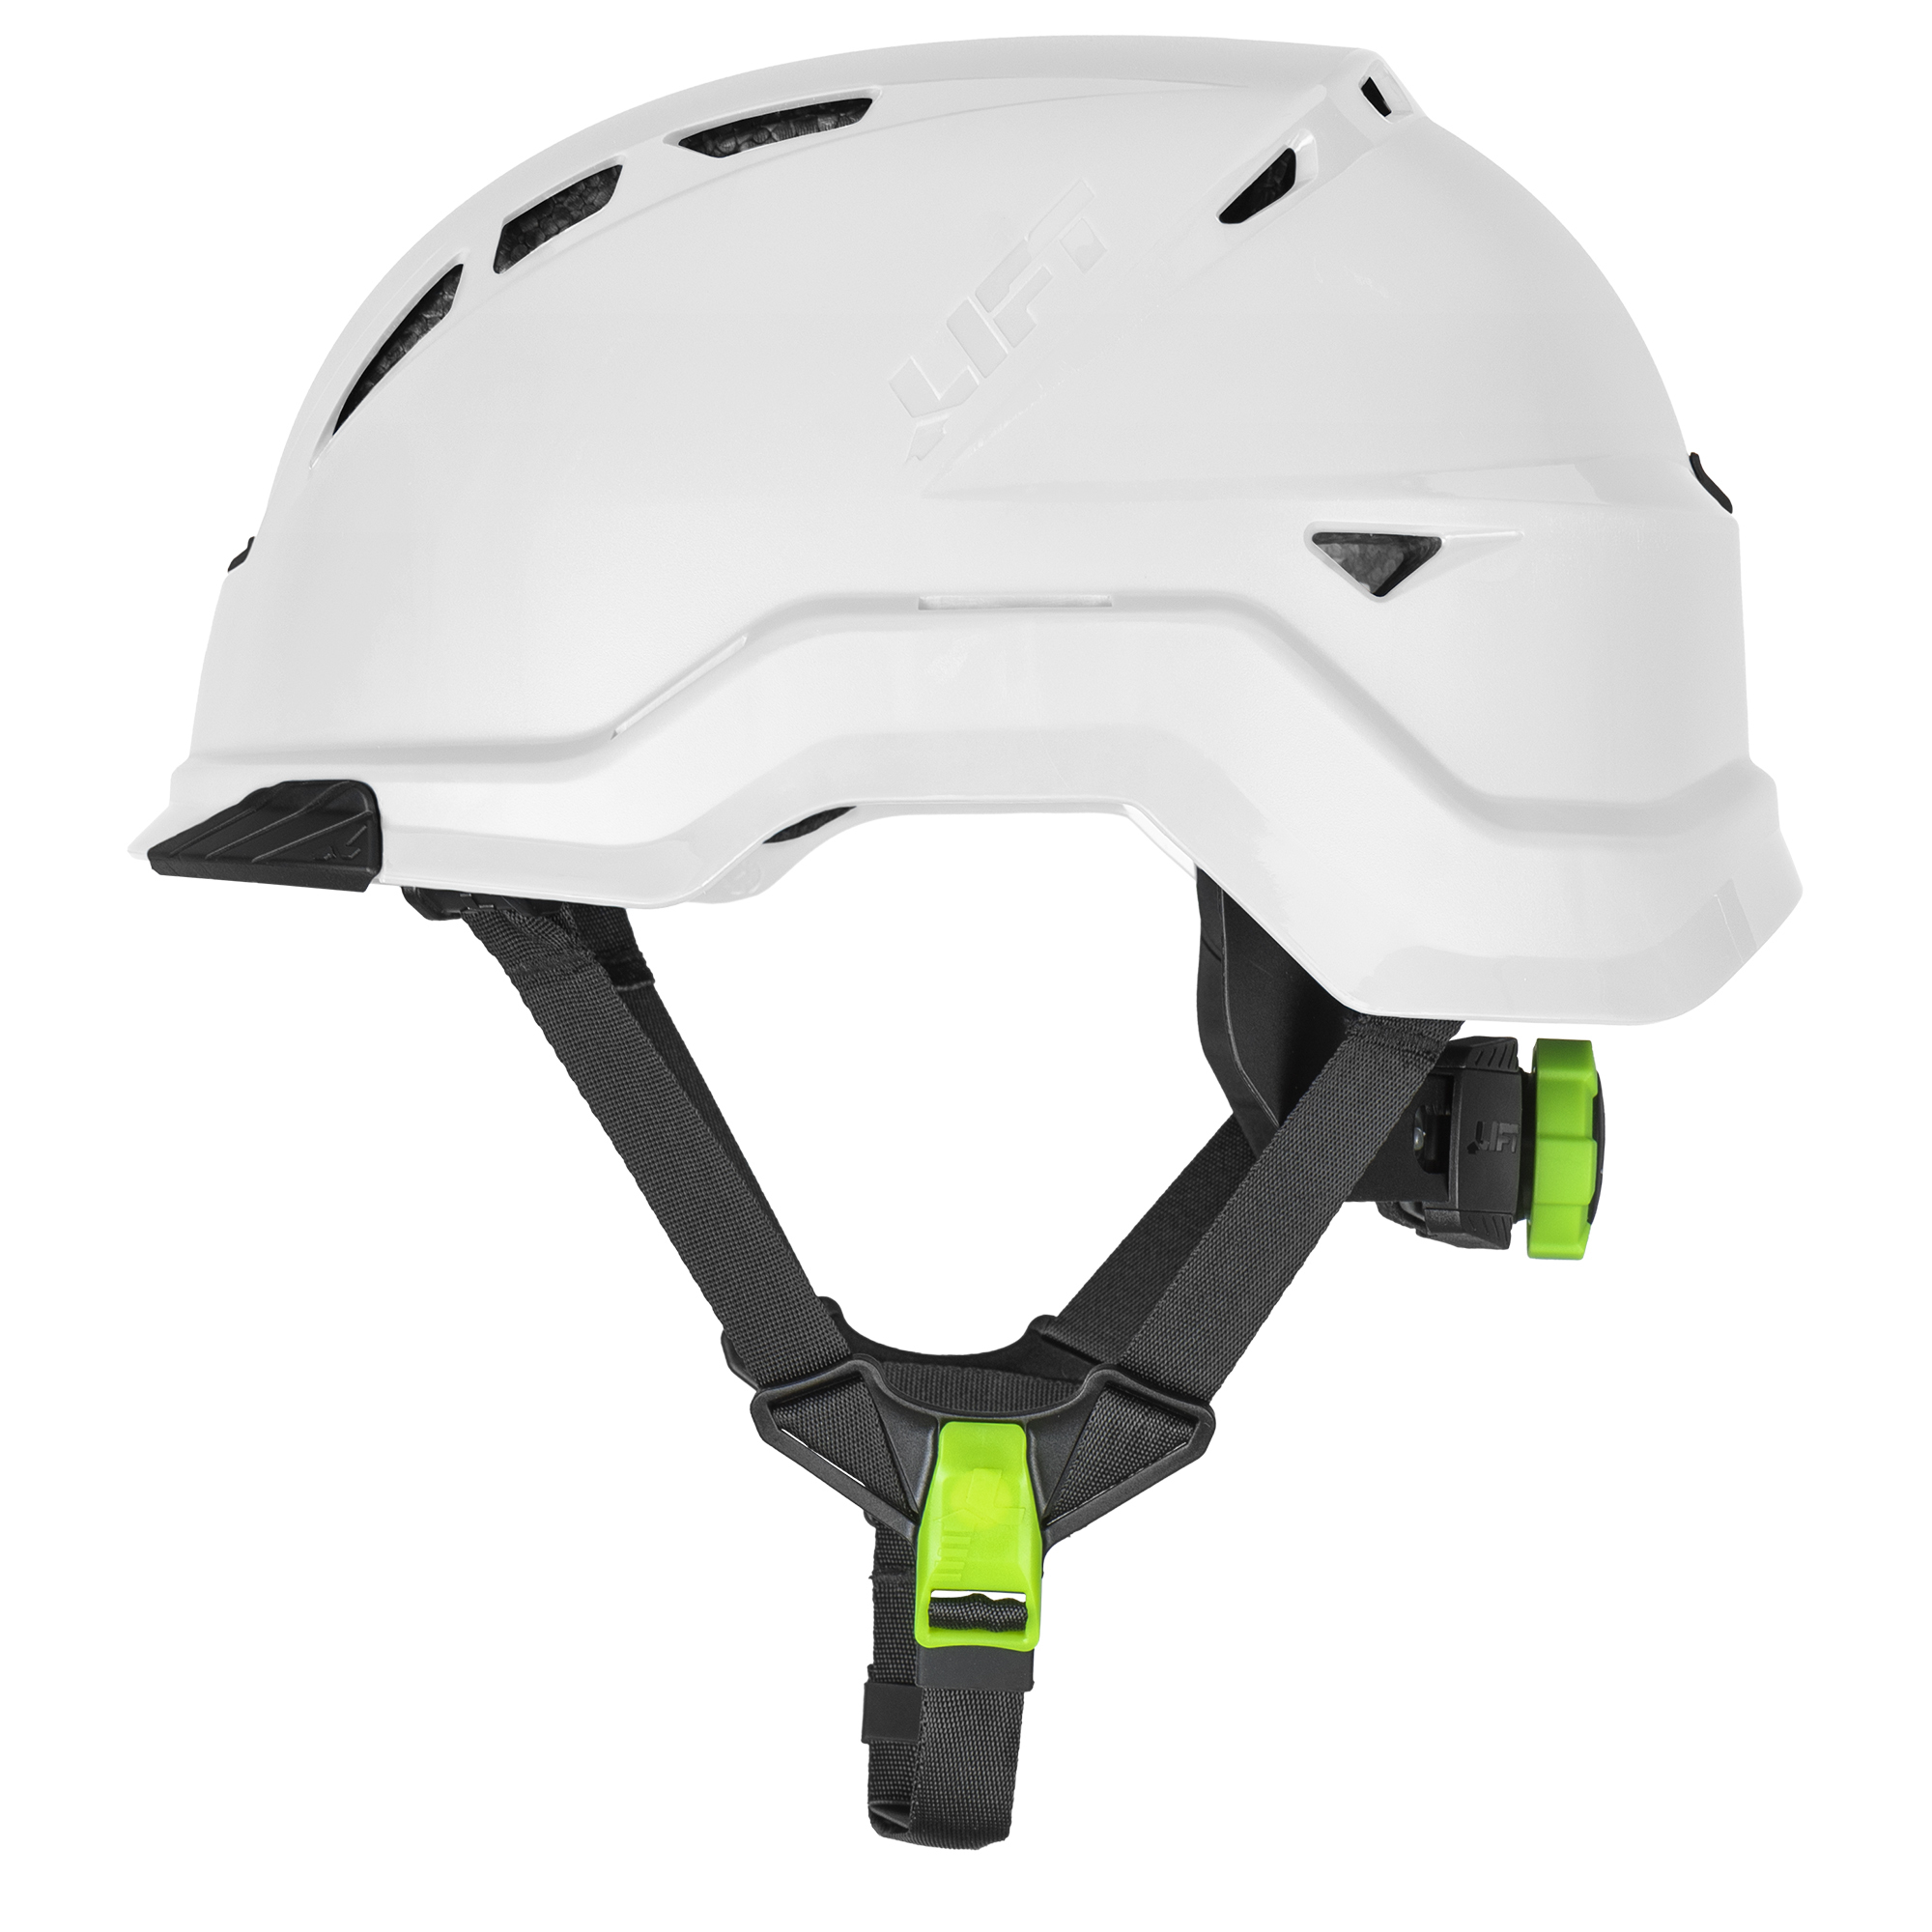 LIFT Safety, RADIX TYPE 2 VENTED (White), Hard Hat Style Helmet, Hat Size Adjustable, Color White, Model HRX-22WC2